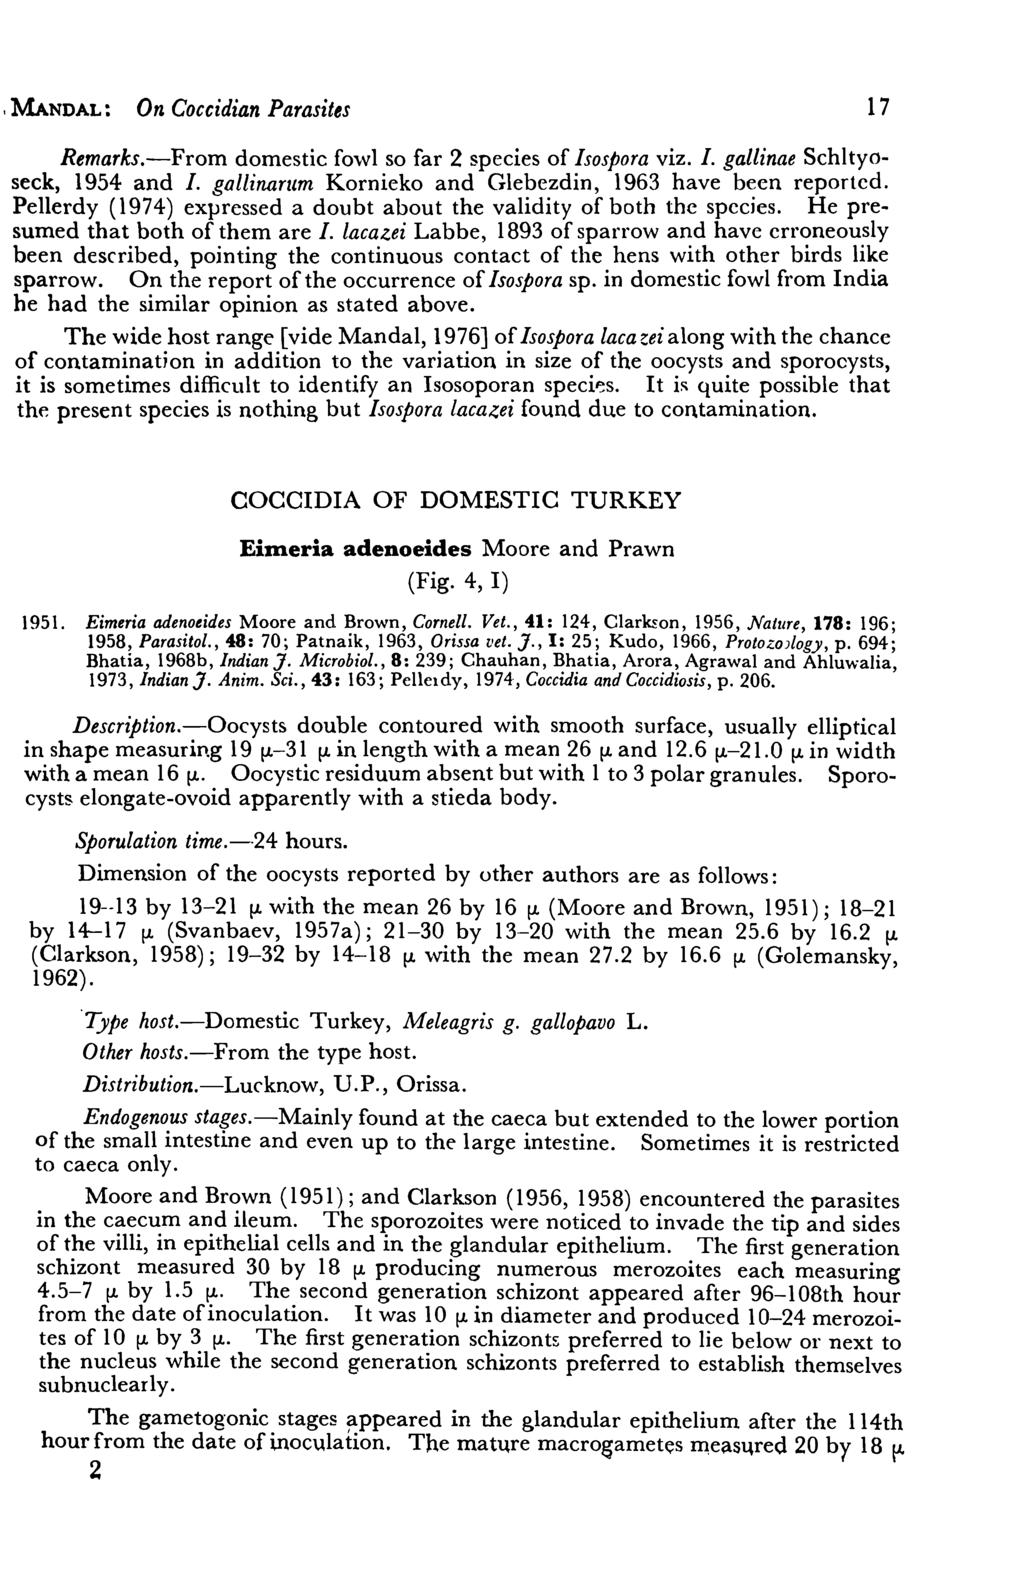 1 MANDAL: On Coccidian Parasites 17 Remarks.-From domestic fo,vl so far 2 species of Isospora viz. l. gallinae Schltyoseck, 1954 and l. gallinarum Kornieko and Glebezdin, 1963 have been reported.